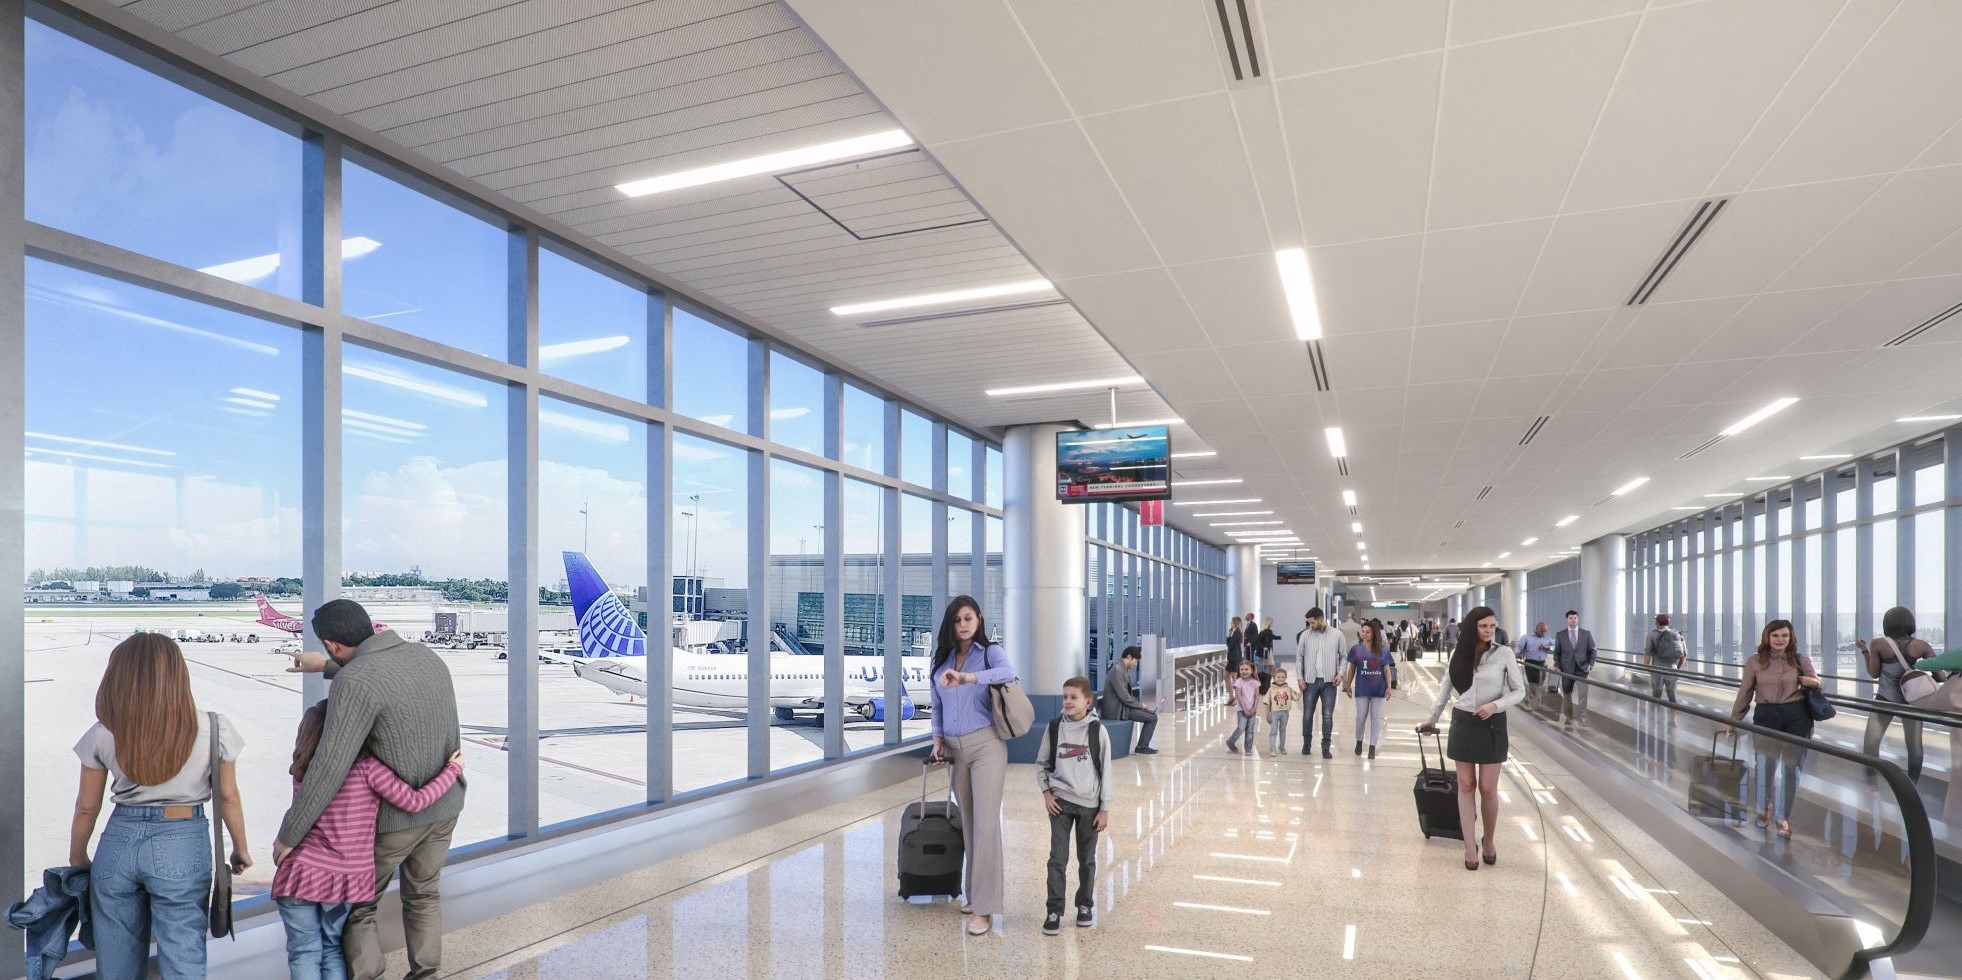 A graphic illustration of the new Terminal Connector to be built between Terminals 1 and 2 at the Fort Lauderdale-Hollywood International Airport.